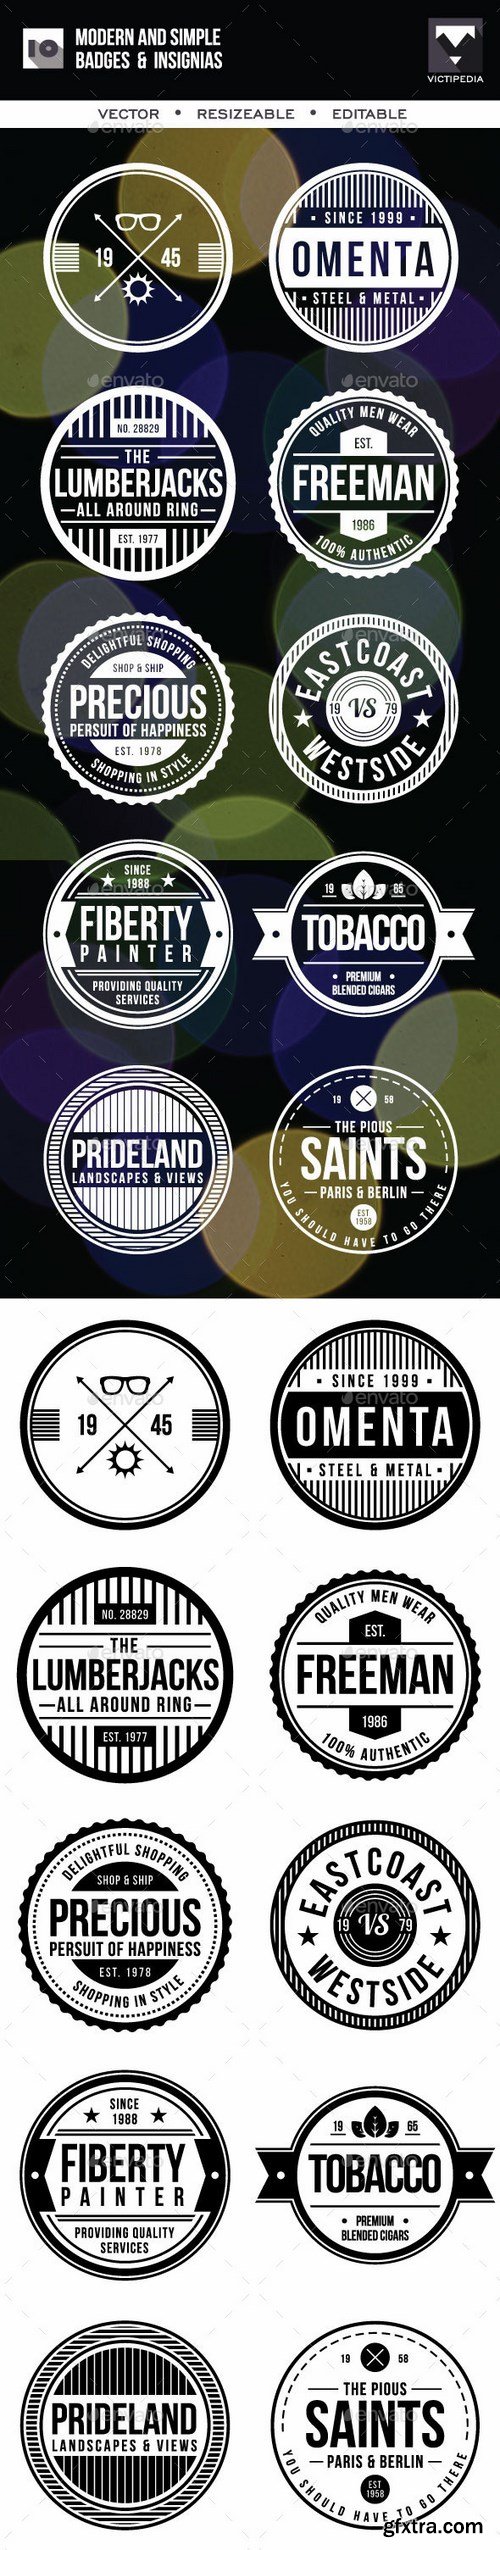 Graphicriver - 10 Modern And SImple Badges 10274164